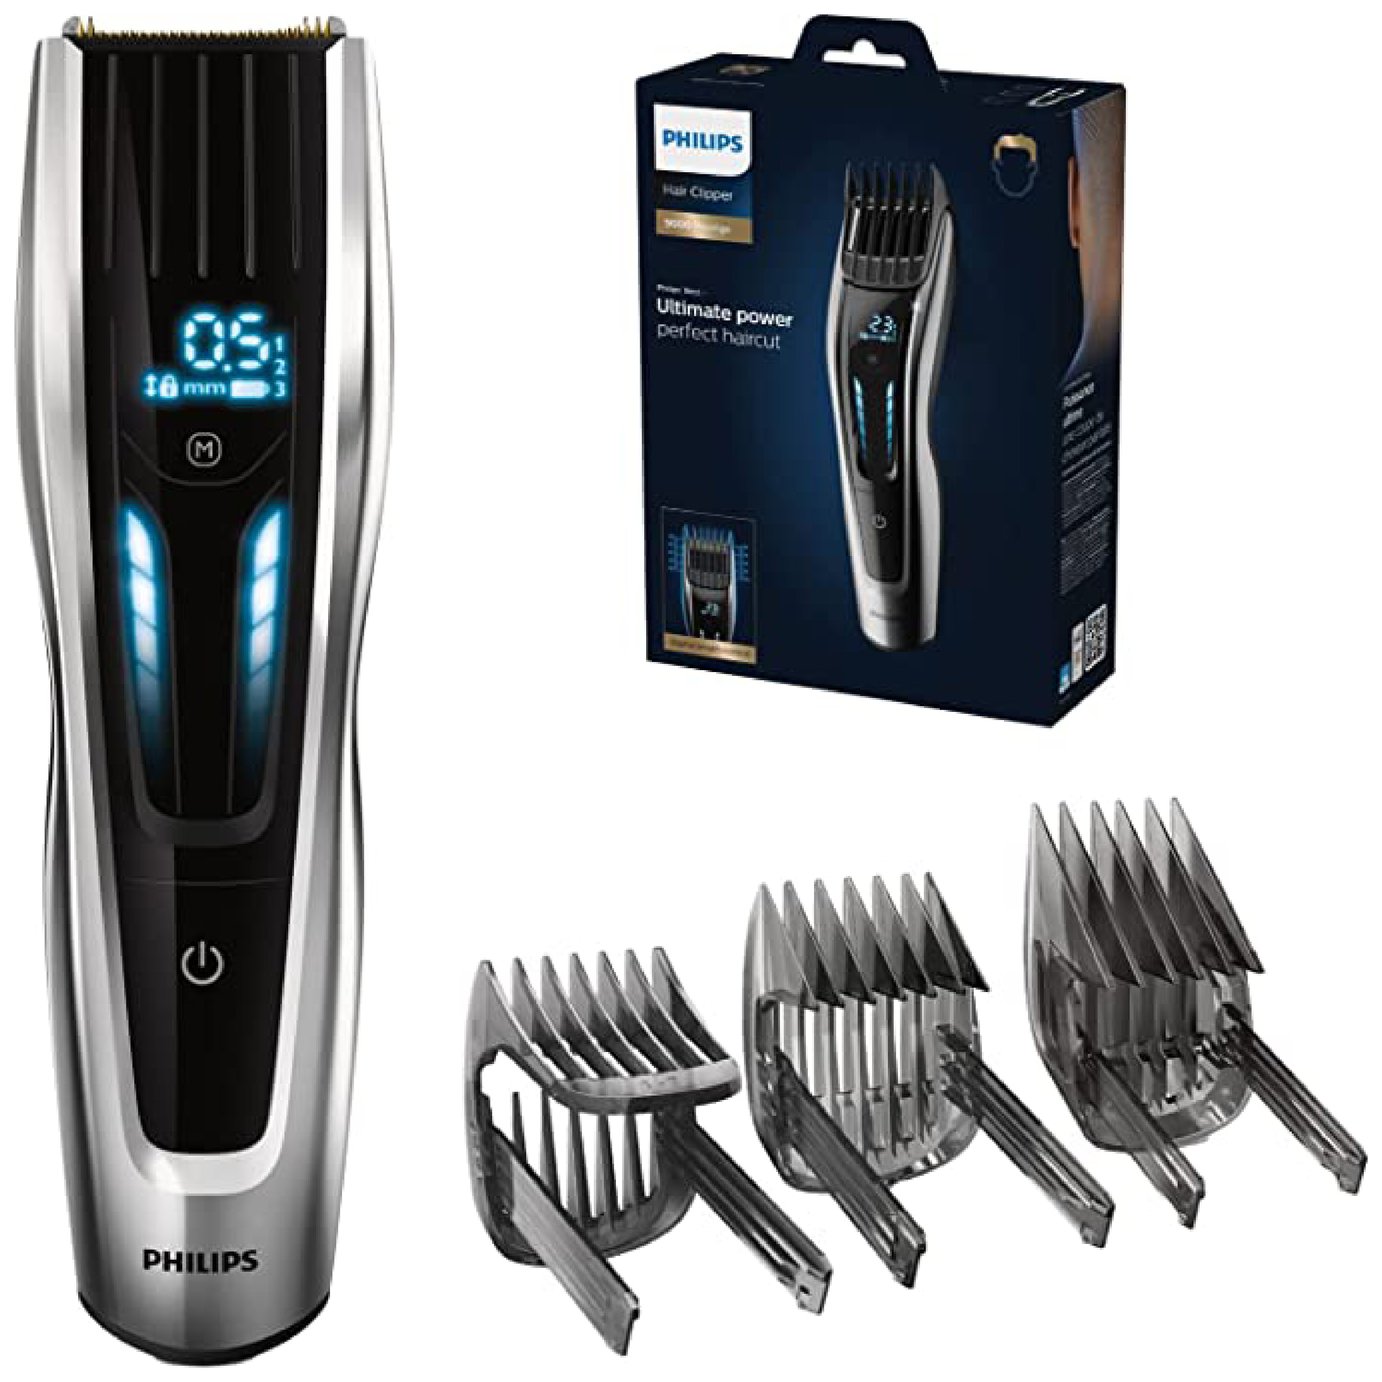 philips clippers argos